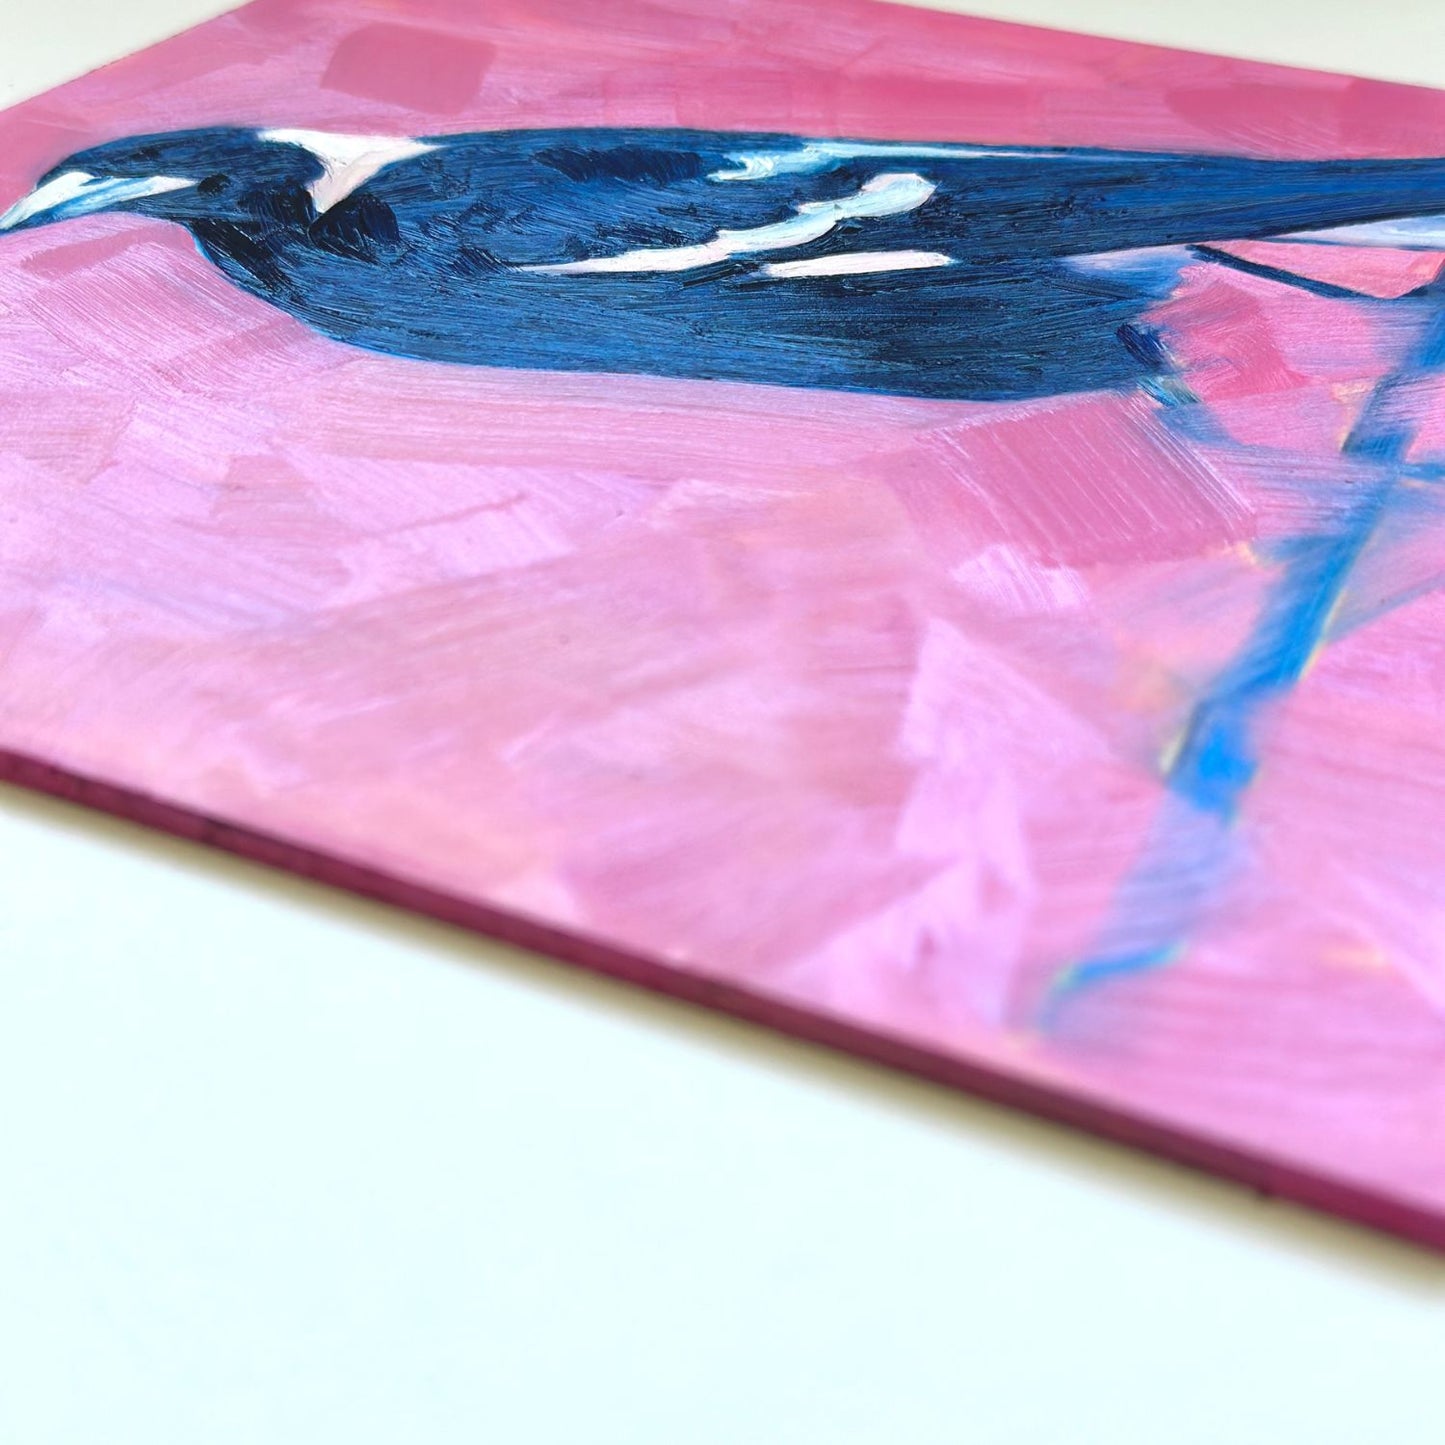 closeup of an original oil painting of a navy blue and white magpie on a textured bright pink background